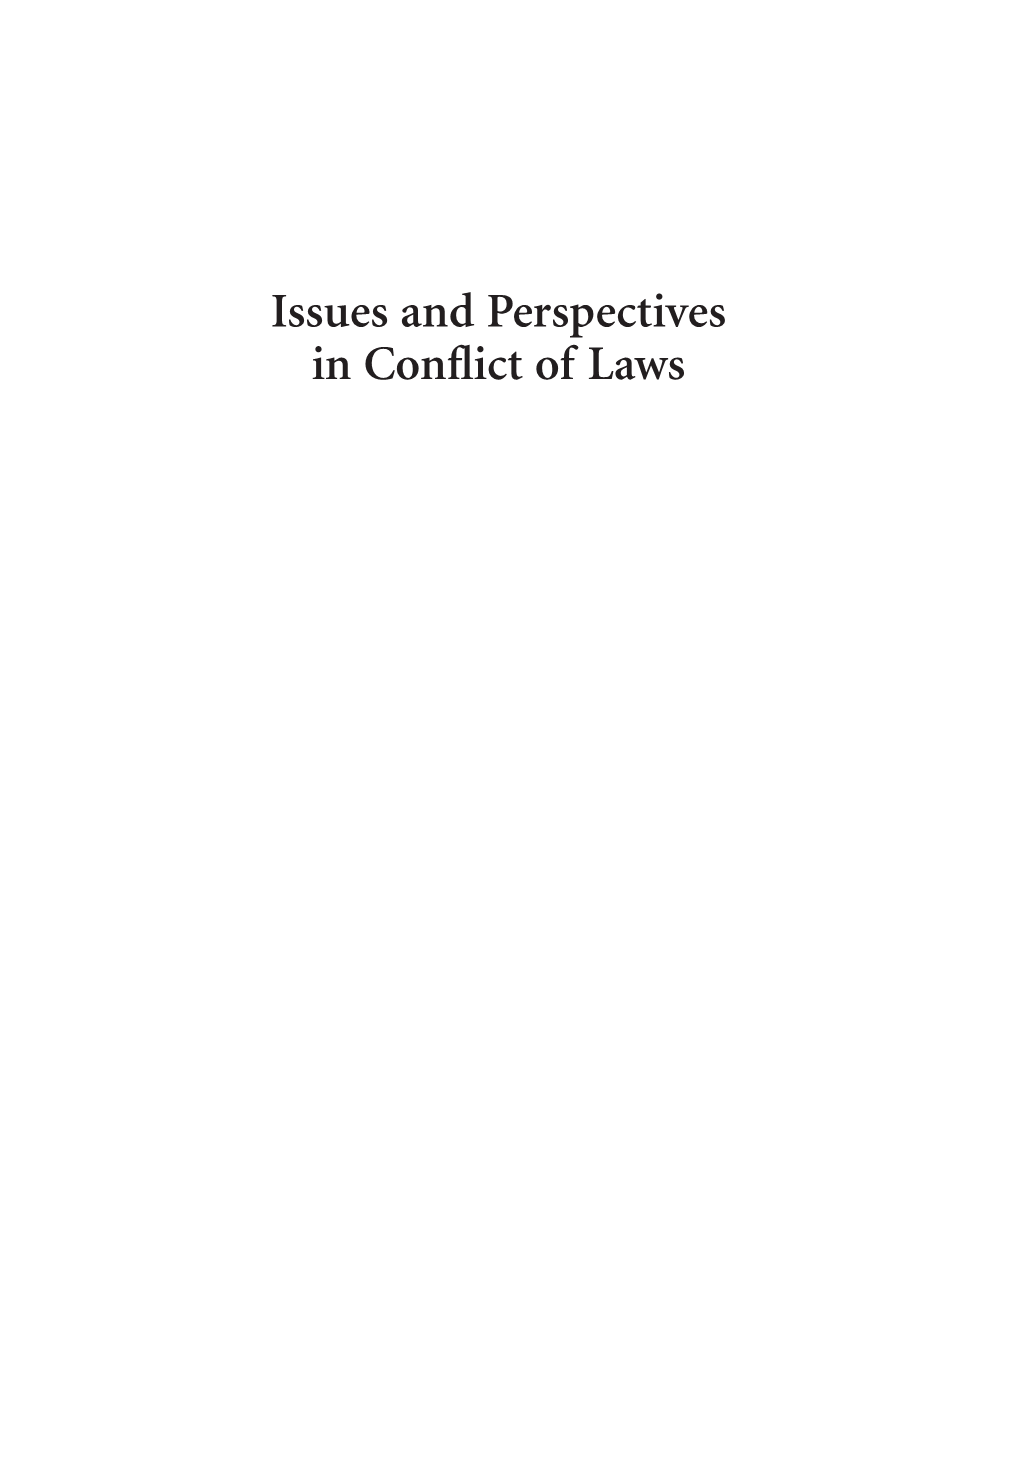 Issues and Perspectives in Conflict of Laws